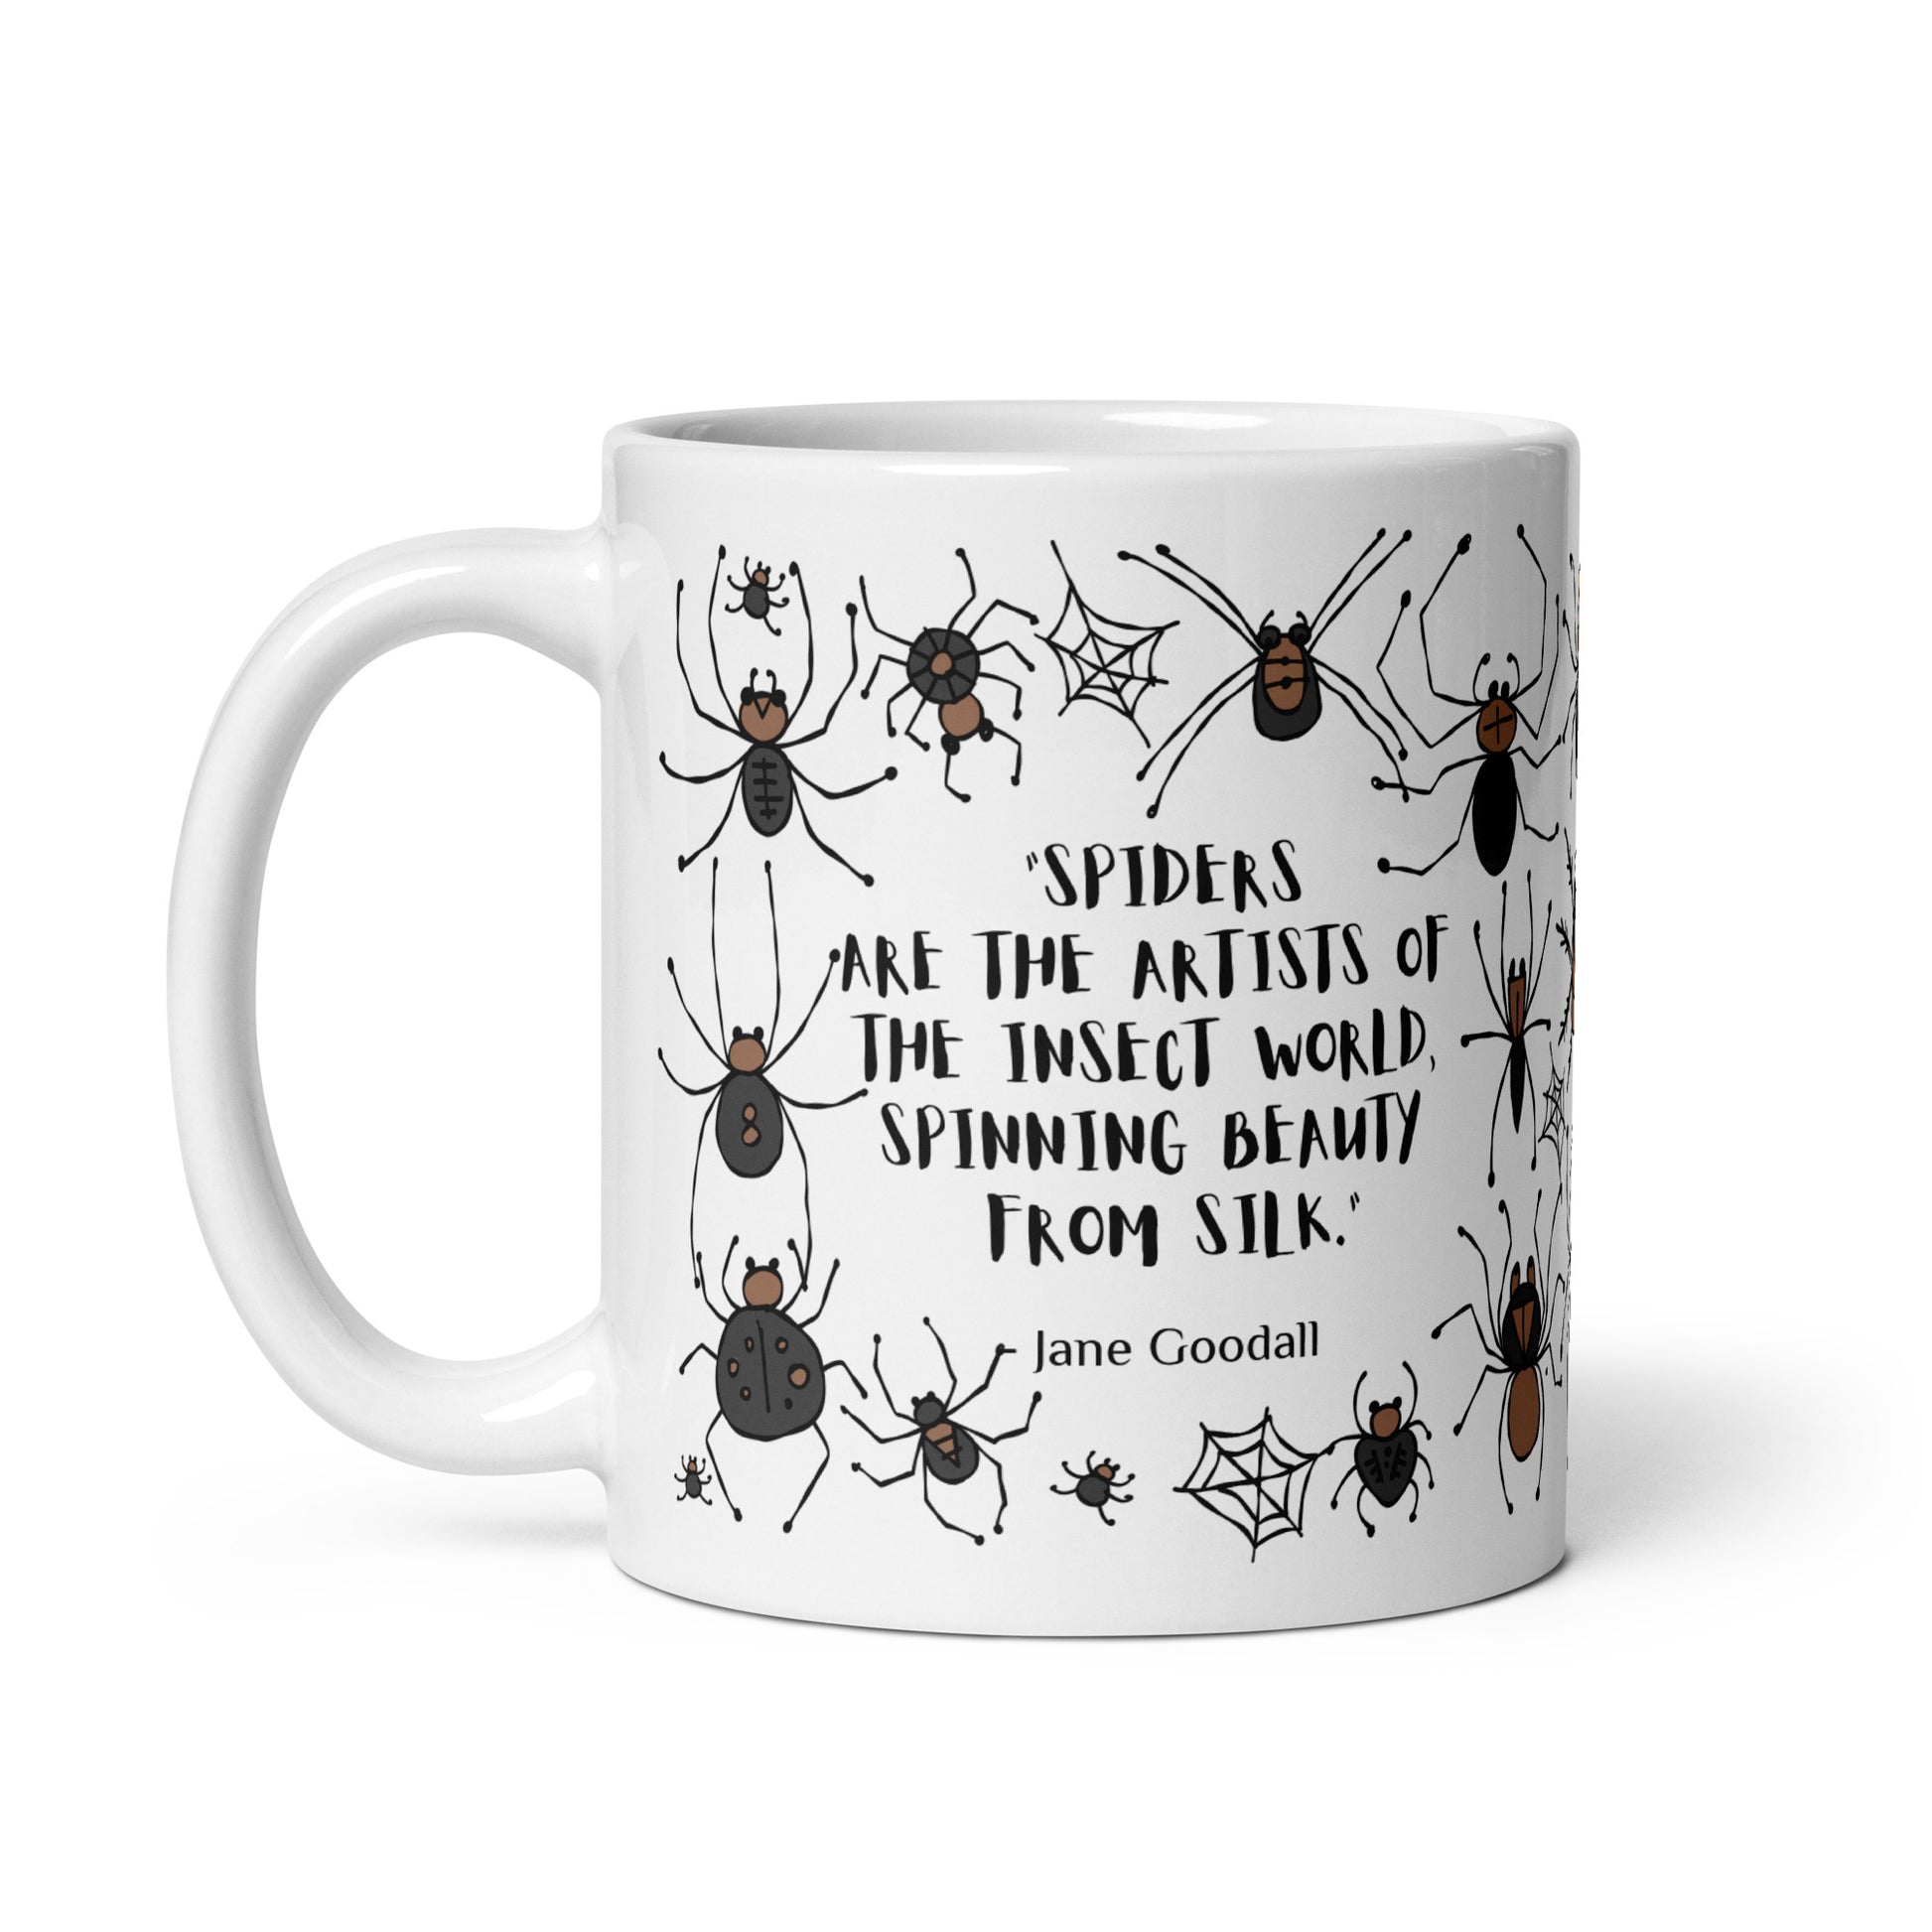 Personalised Ceramic mug 11oz spiders for Arachnologist. Quote on mug: "Spiders are the artists of the insect world, spinning beauty from silk." - Jane Goodall